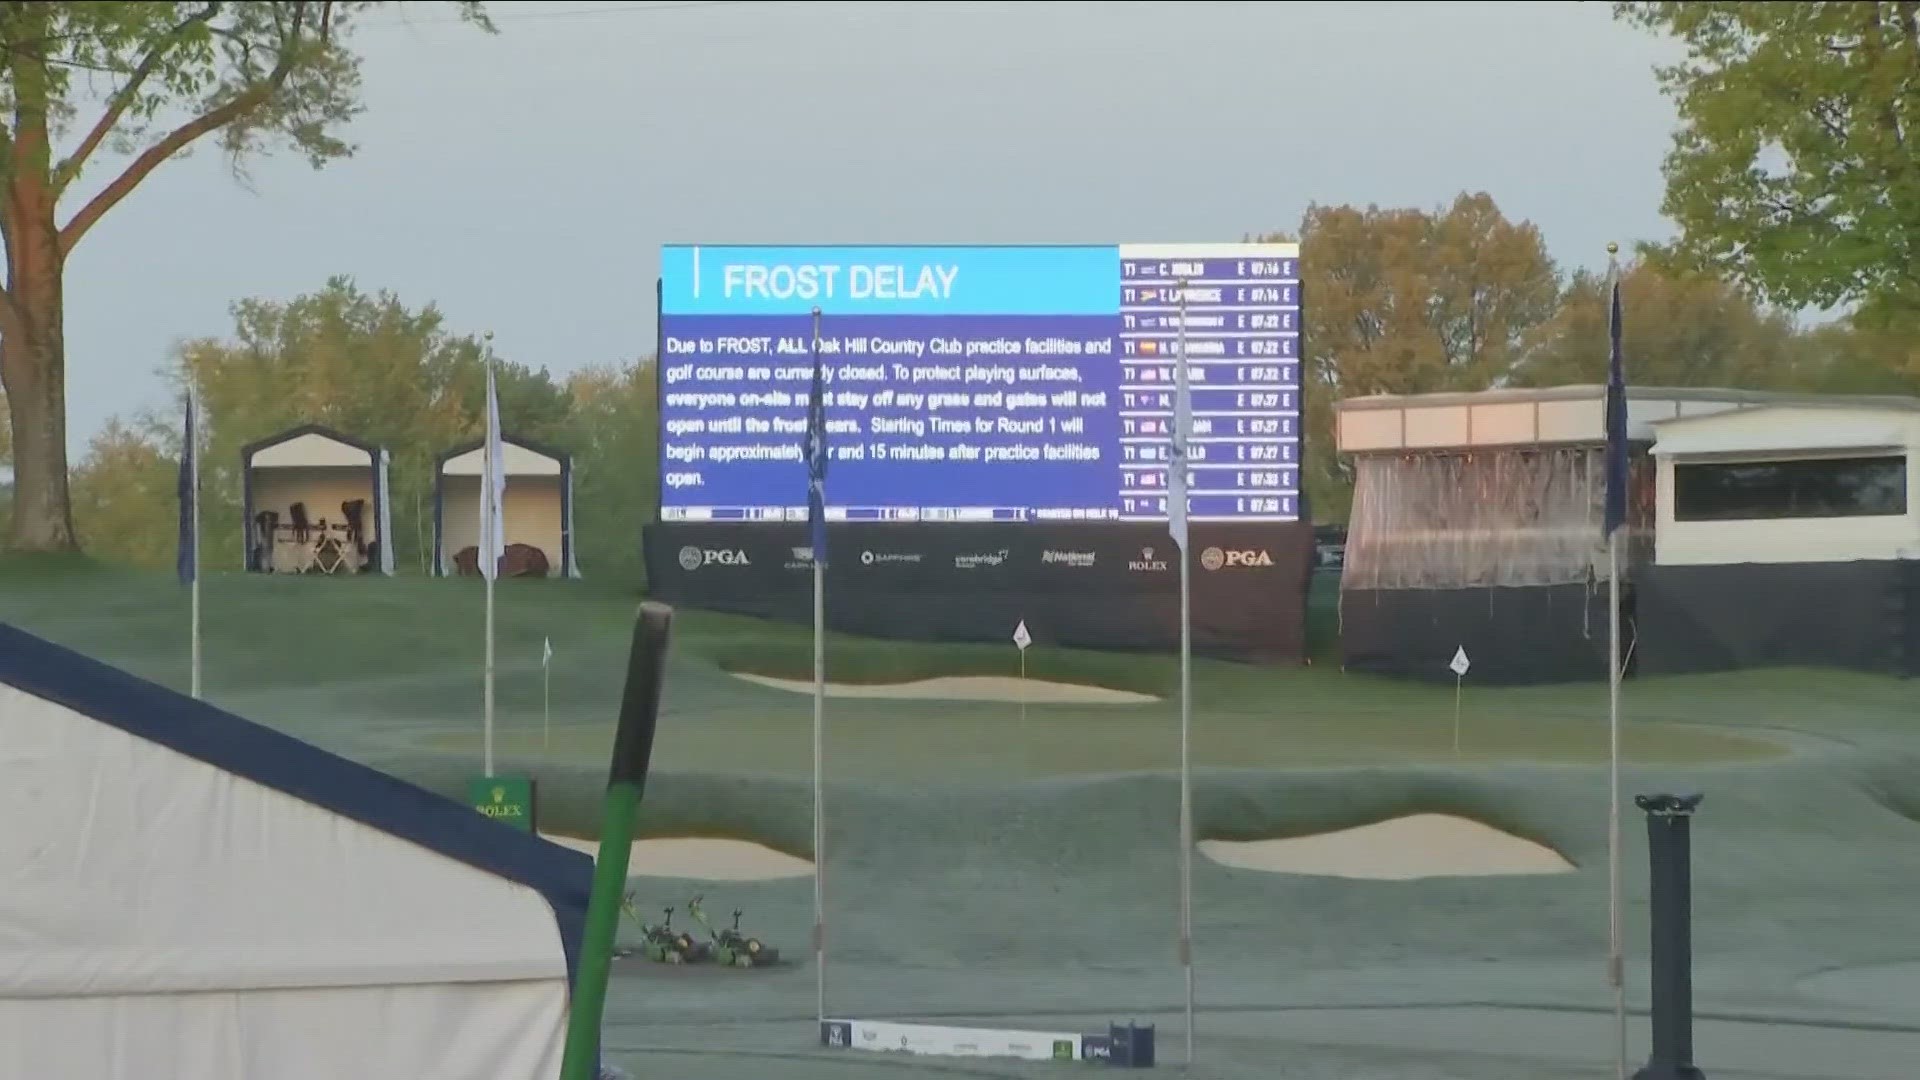 Frost delay on day one of PGA tour in Rochester